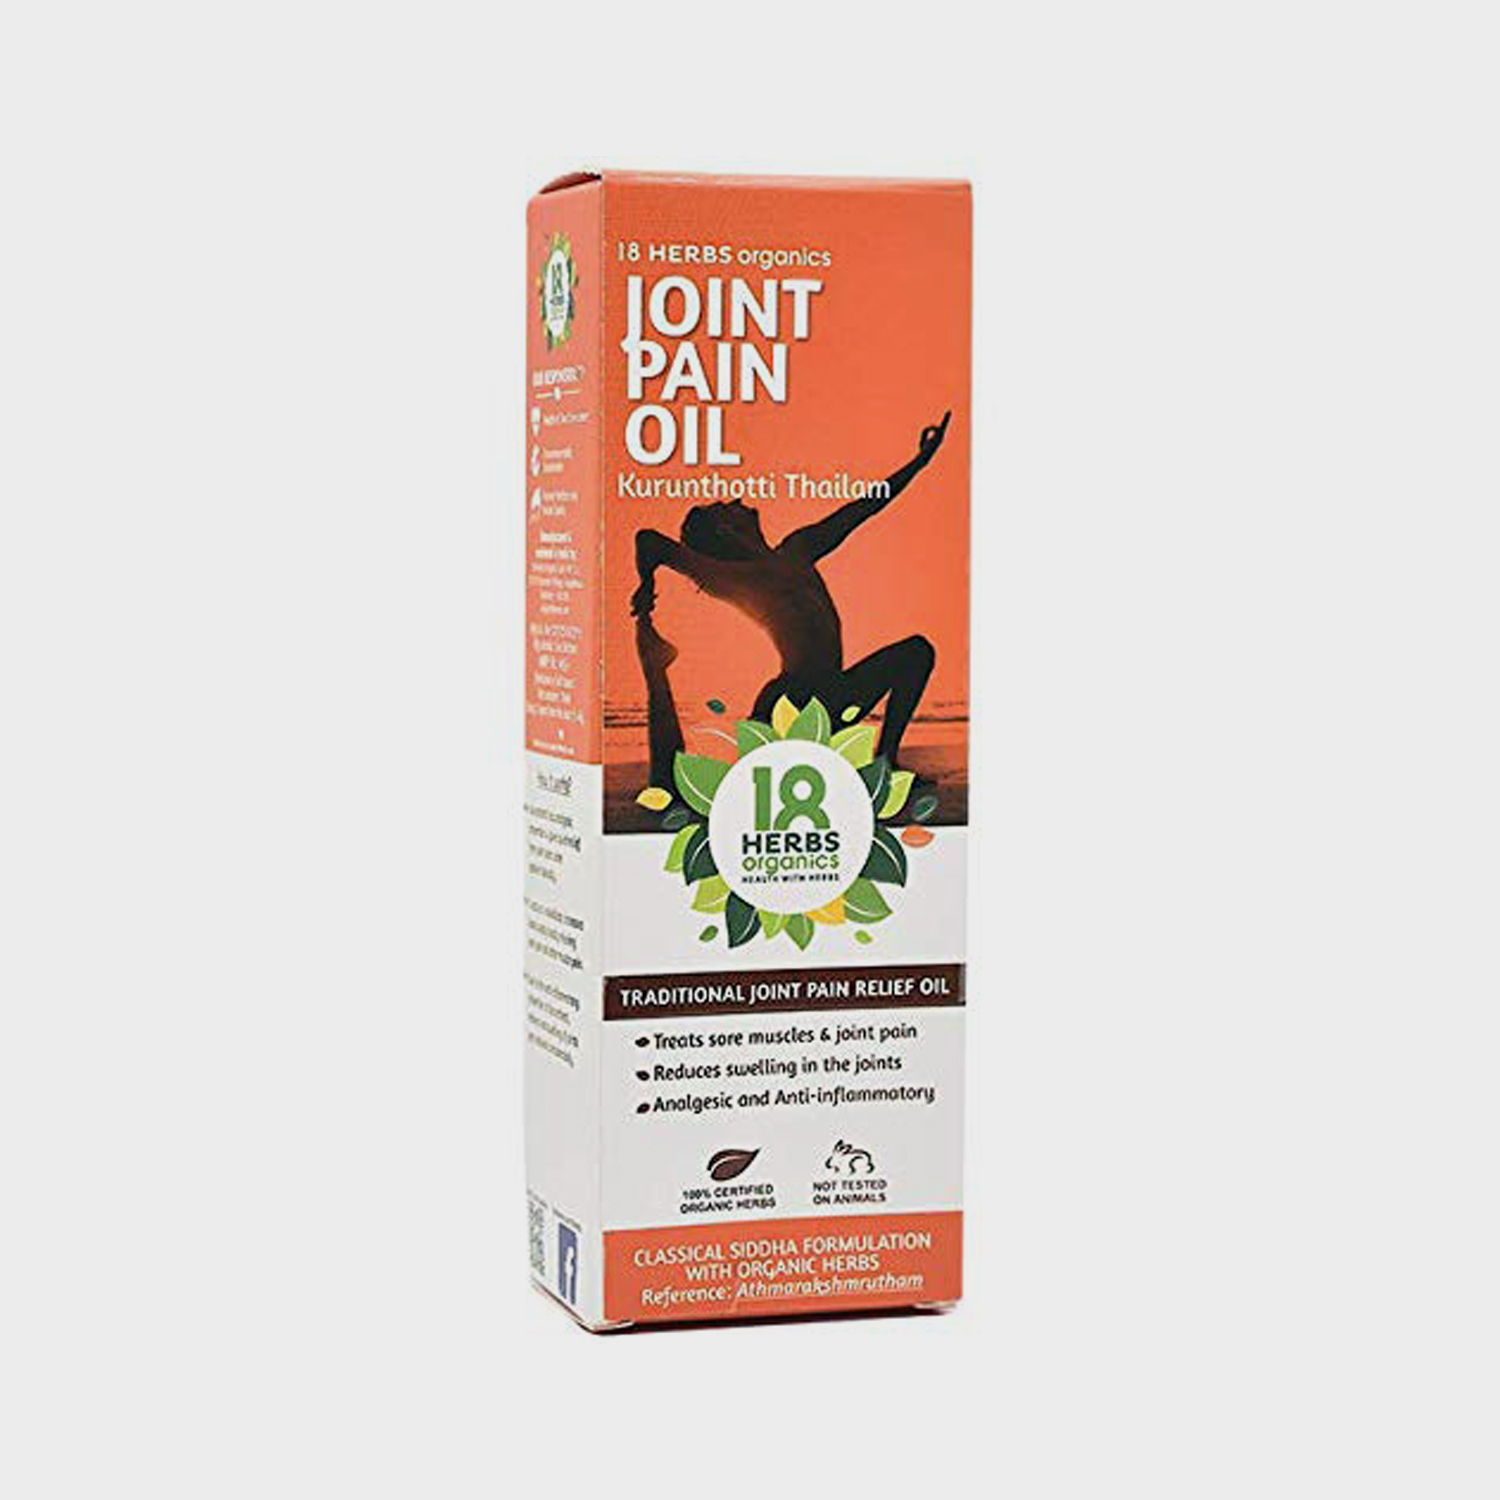 18 Herbs Kurunthotti Thailam (Joint Pain Oil) 70ml @ Rs.129 | Limited Offer